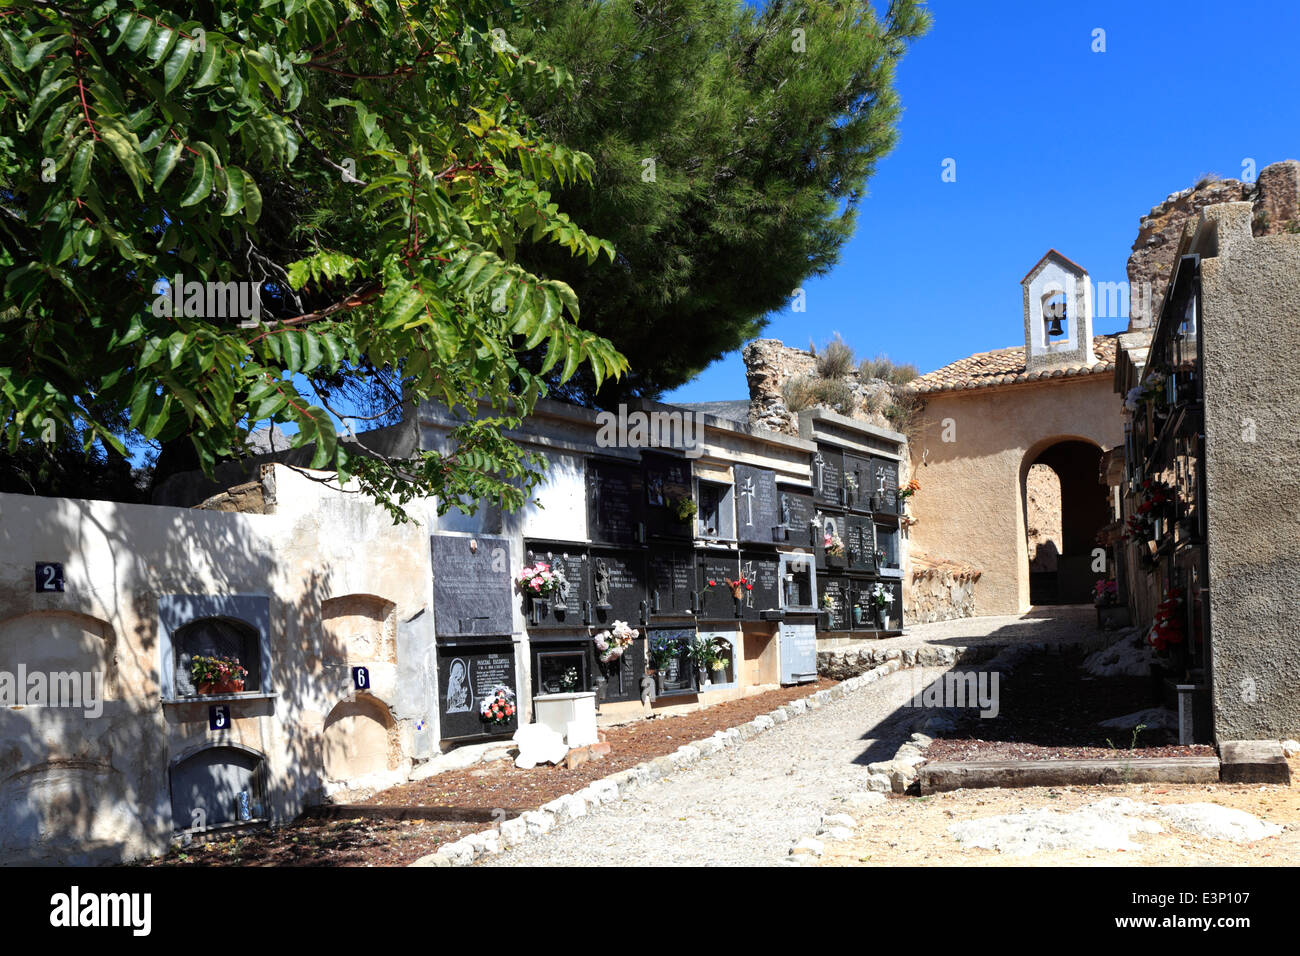 The Cemetary at Guadalest medival village, Costa Blanca, Spain, Europe Stock Photo